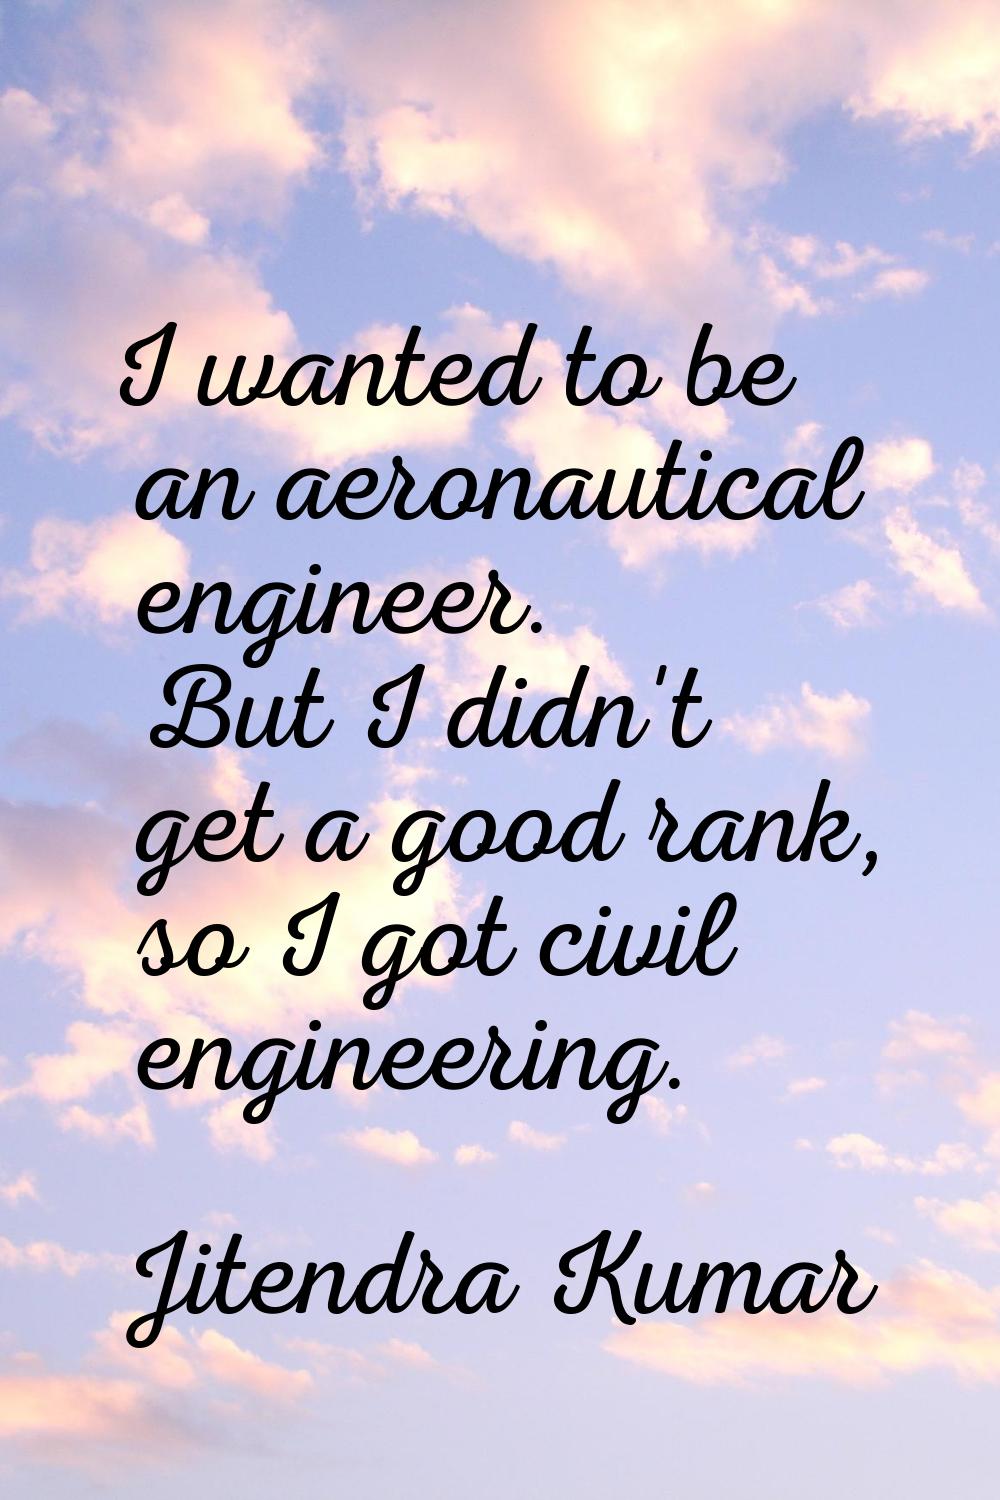 I wanted to be an aeronautical engineer. But I didn't get a good rank, so I got civil engineering.